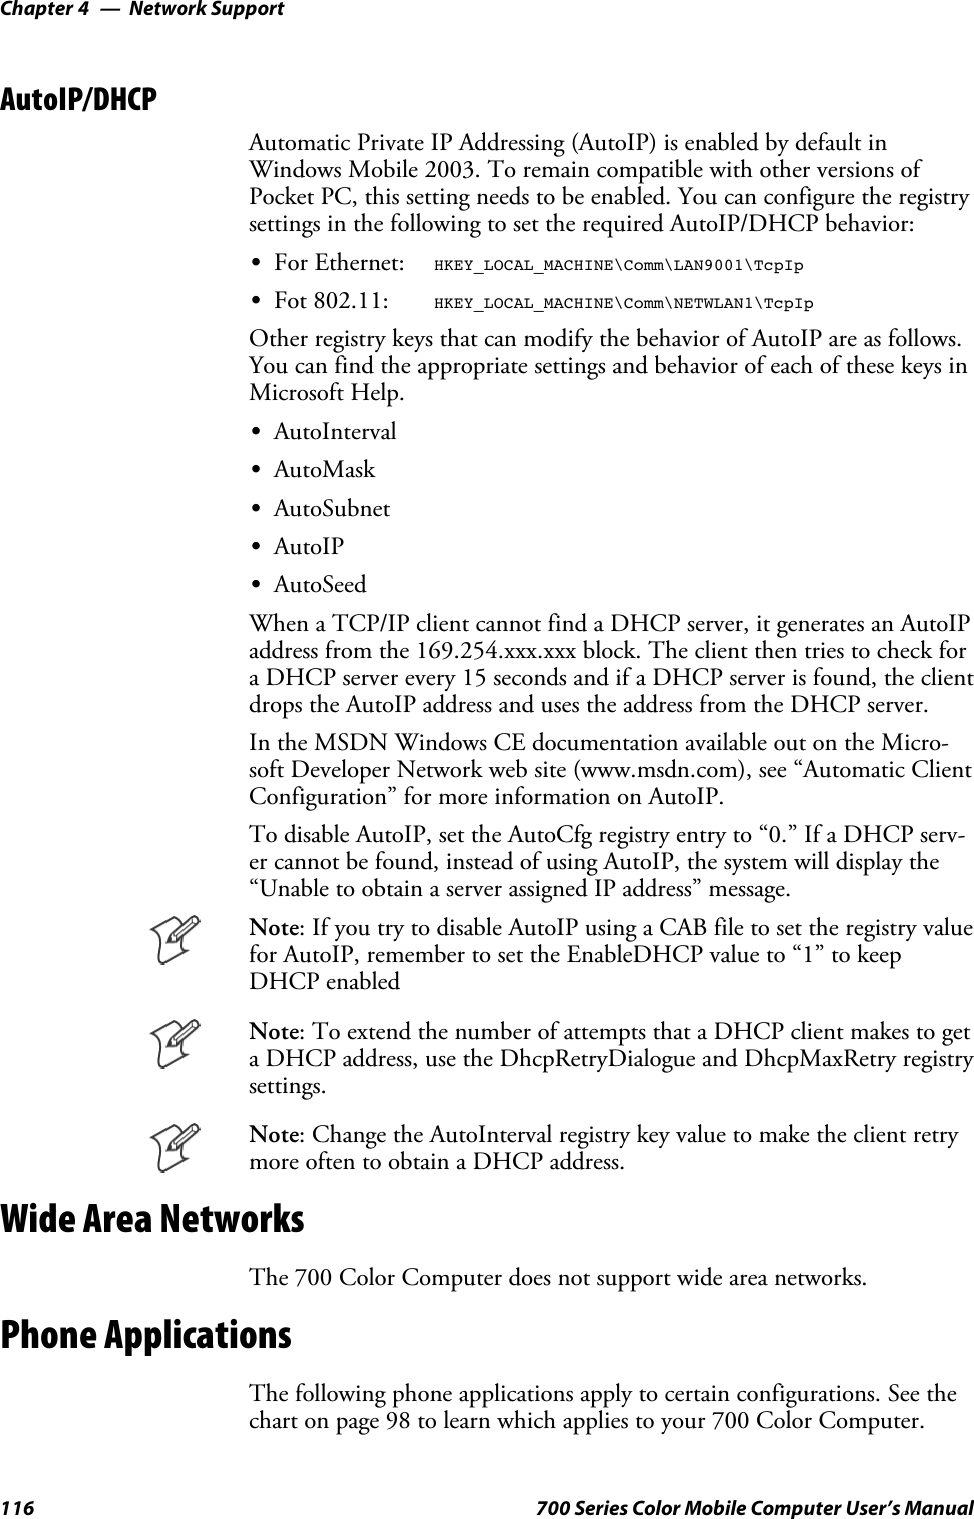 Network SupportChapter —4116 700 Series Color Mobile Computer User’s ManualAutoIP/DHCPAutomatic Private IP Addressing (AutoIP) is enabled by default inWindows Mobile 2003. To remain compatible with other versions ofPocket PC, this setting needs to be enabled. You can configure the registrysettings in the following to set the required AutoIP/DHCP behavior:SFor Ethernet: HKEY_LOCAL_MACHINE\Comm\LAN9001\TcpIpSFot 802.11: HKEY_LOCAL_MACHINE\Comm\NETWLAN1\TcpIpOther registry keys that can modify the behavior of AutoIP are as follows.You can find the appropriate settings and behavior of each of these keys inMicrosoft Help.SAutoIntervalSAutoMaskSAutoSubnetSAutoIPSAutoSeedWhen a TCP/IP client cannot find a DHCP server, it generates an AutoIPaddress from the 169.254.xxx.xxx block. The client then tries to check fora DHCP server every 15 seconds and if a DHCP server is found, the clientdrops the AutoIP address and uses the address from the DHCP server.In the MSDN Windows CE documentation available out on the Micro-soft Developer Network web site (www.msdn.com), see “Automatic ClientConfiguration” for more information on AutoIP.To disable AutoIP, set the AutoCfg registry entry to “0.” If a DHCP serv-er cannot be found, instead of using AutoIP, the system will display the“Unable to obtain a server assigned IP address” message.Note: If you try to disable AutoIP using a CAB file to set the registry valuefor AutoIP, remember to set the EnableDHCP value to “1” to keepDHCP enabledNote: To extend the number of attempts that a DHCP client makes to geta DHCP address, use the DhcpRetryDialogue and DhcpMaxRetry registrysettings.Note: Change the AutoInterval registry key value to make the client retrymore often to obtain a DHCP address.Wide Area NetworksThe 700 Color Computer does not support wide area networks.Phone ApplicationsThe following phone applications apply to certain configurations. See thechart on page 98 to learn which applies to your 700 Color Computer.